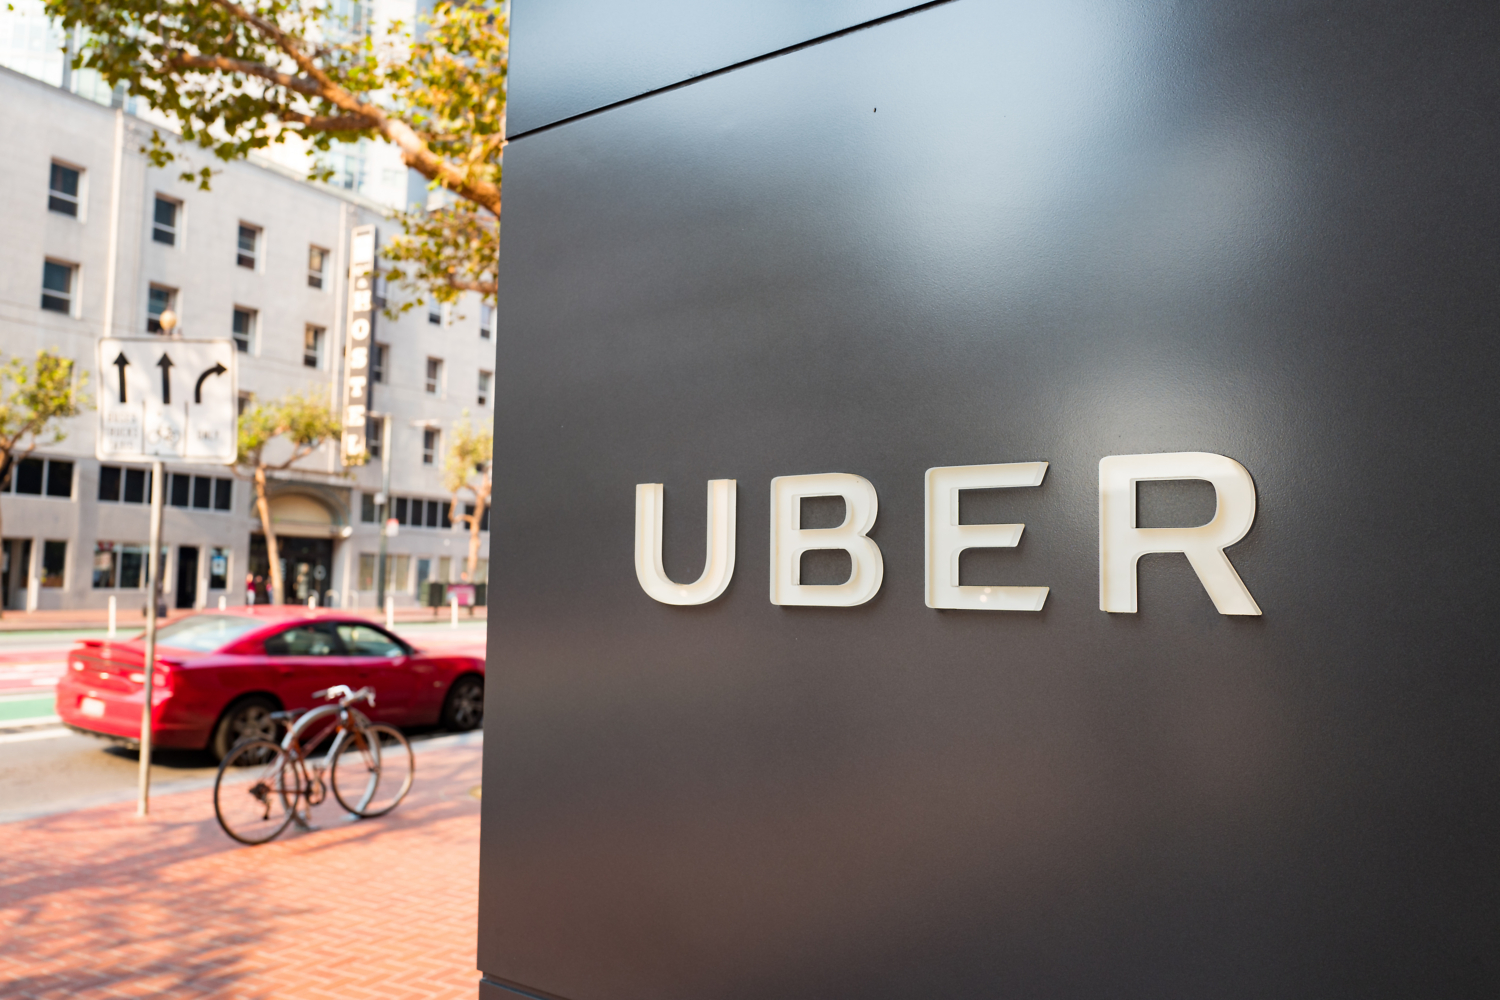 An Uber sign ahead of the deal with Tesla, Hertz, and Tom Brady